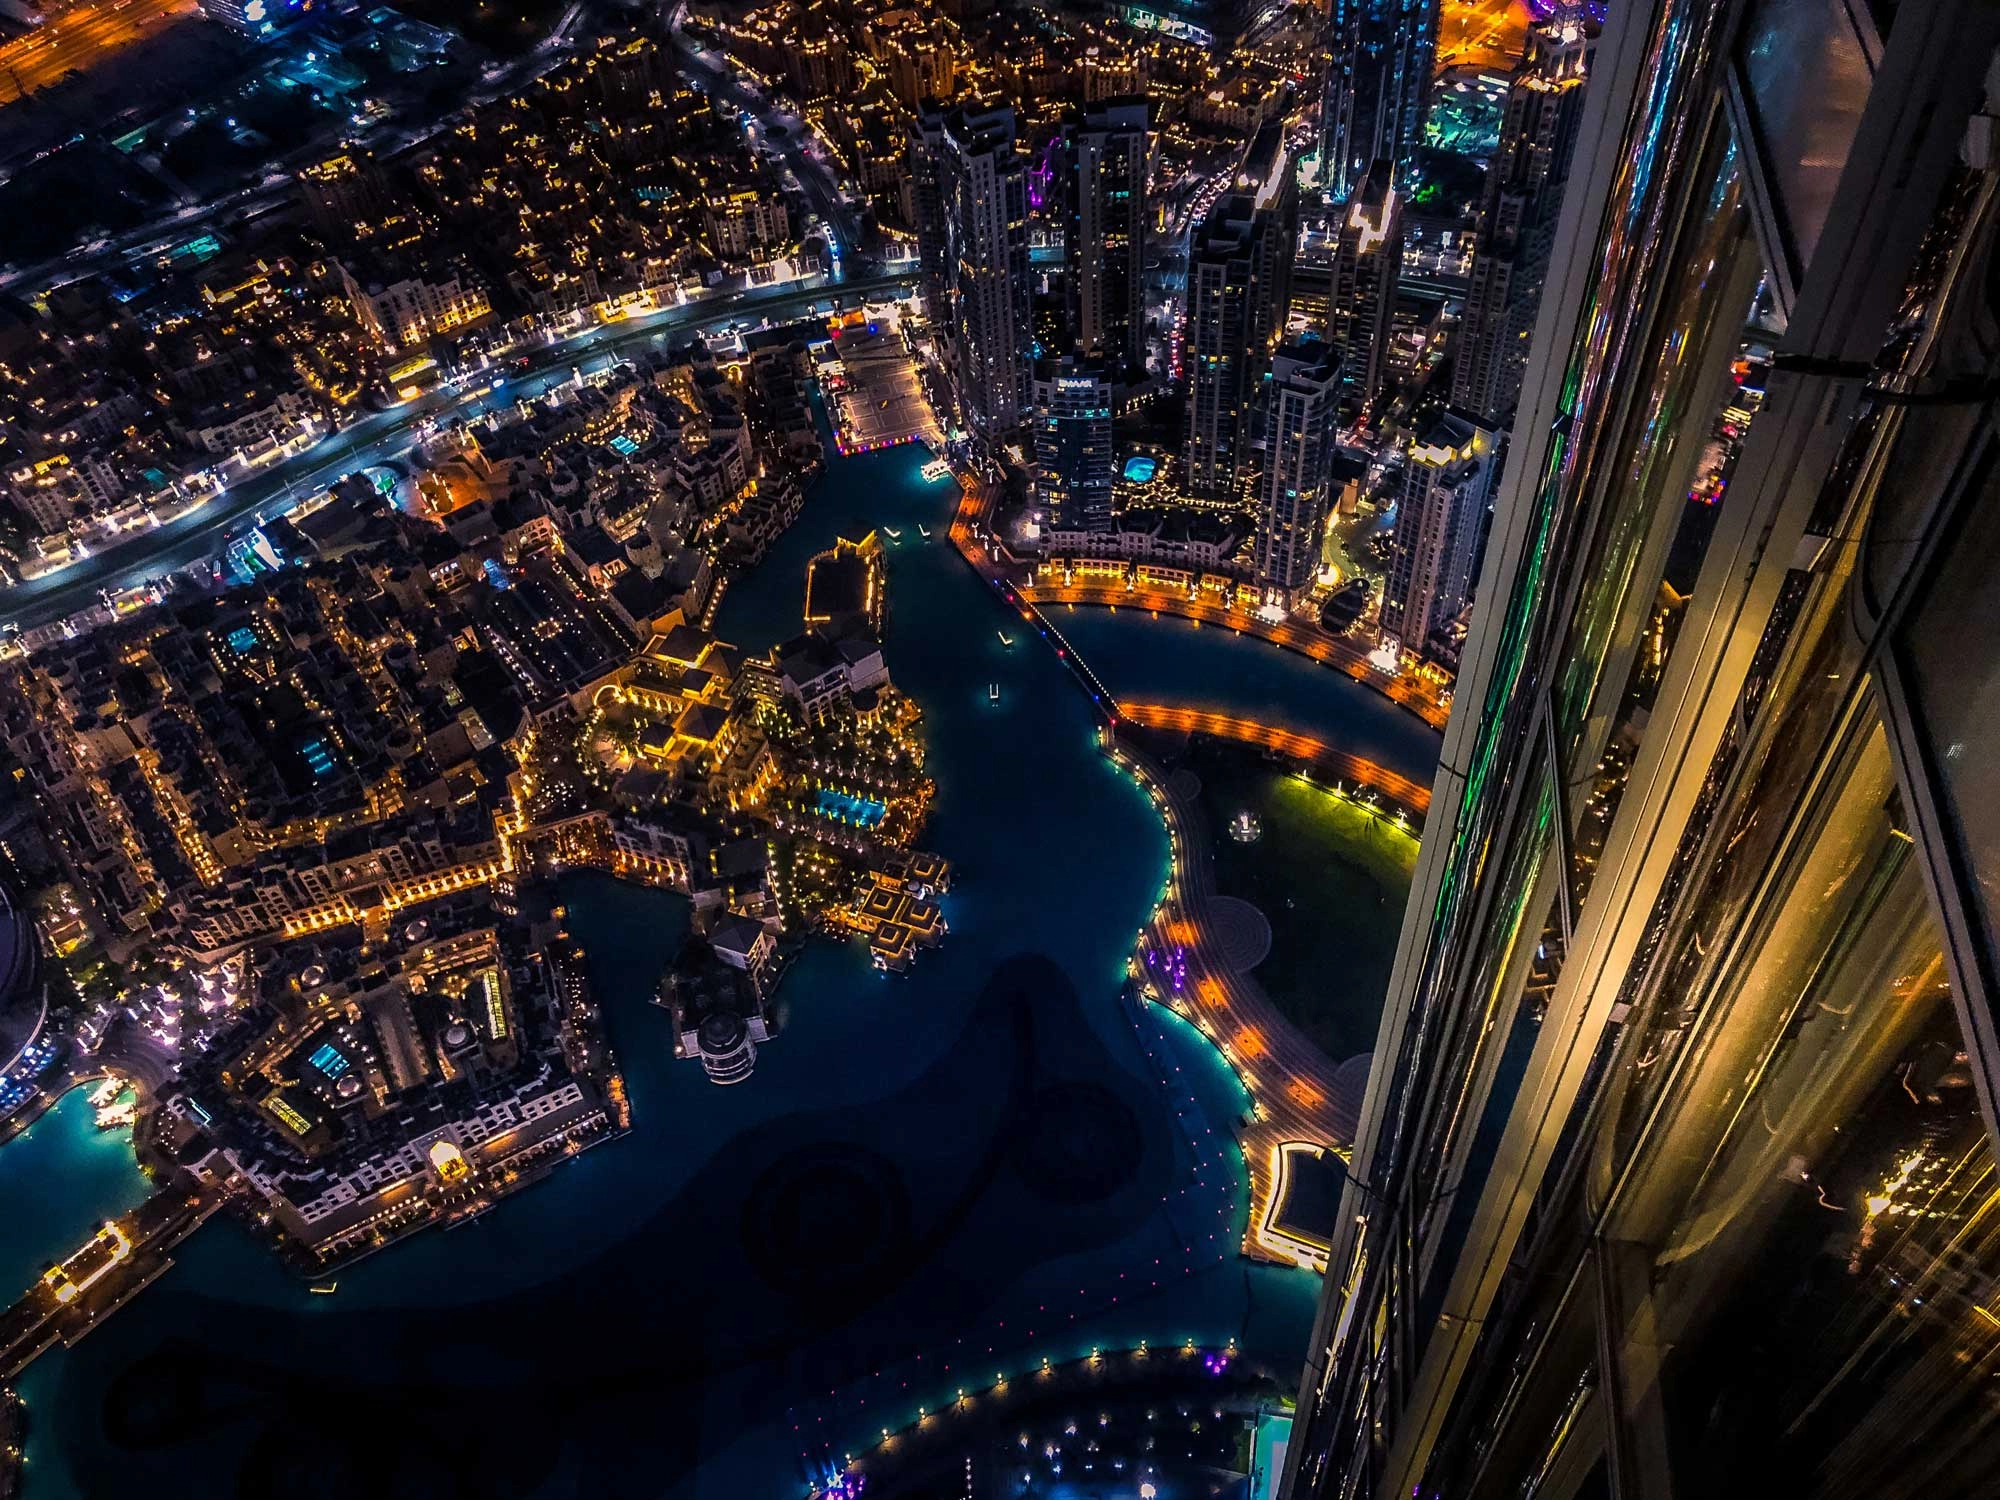 View from the top of Burj Khalifa